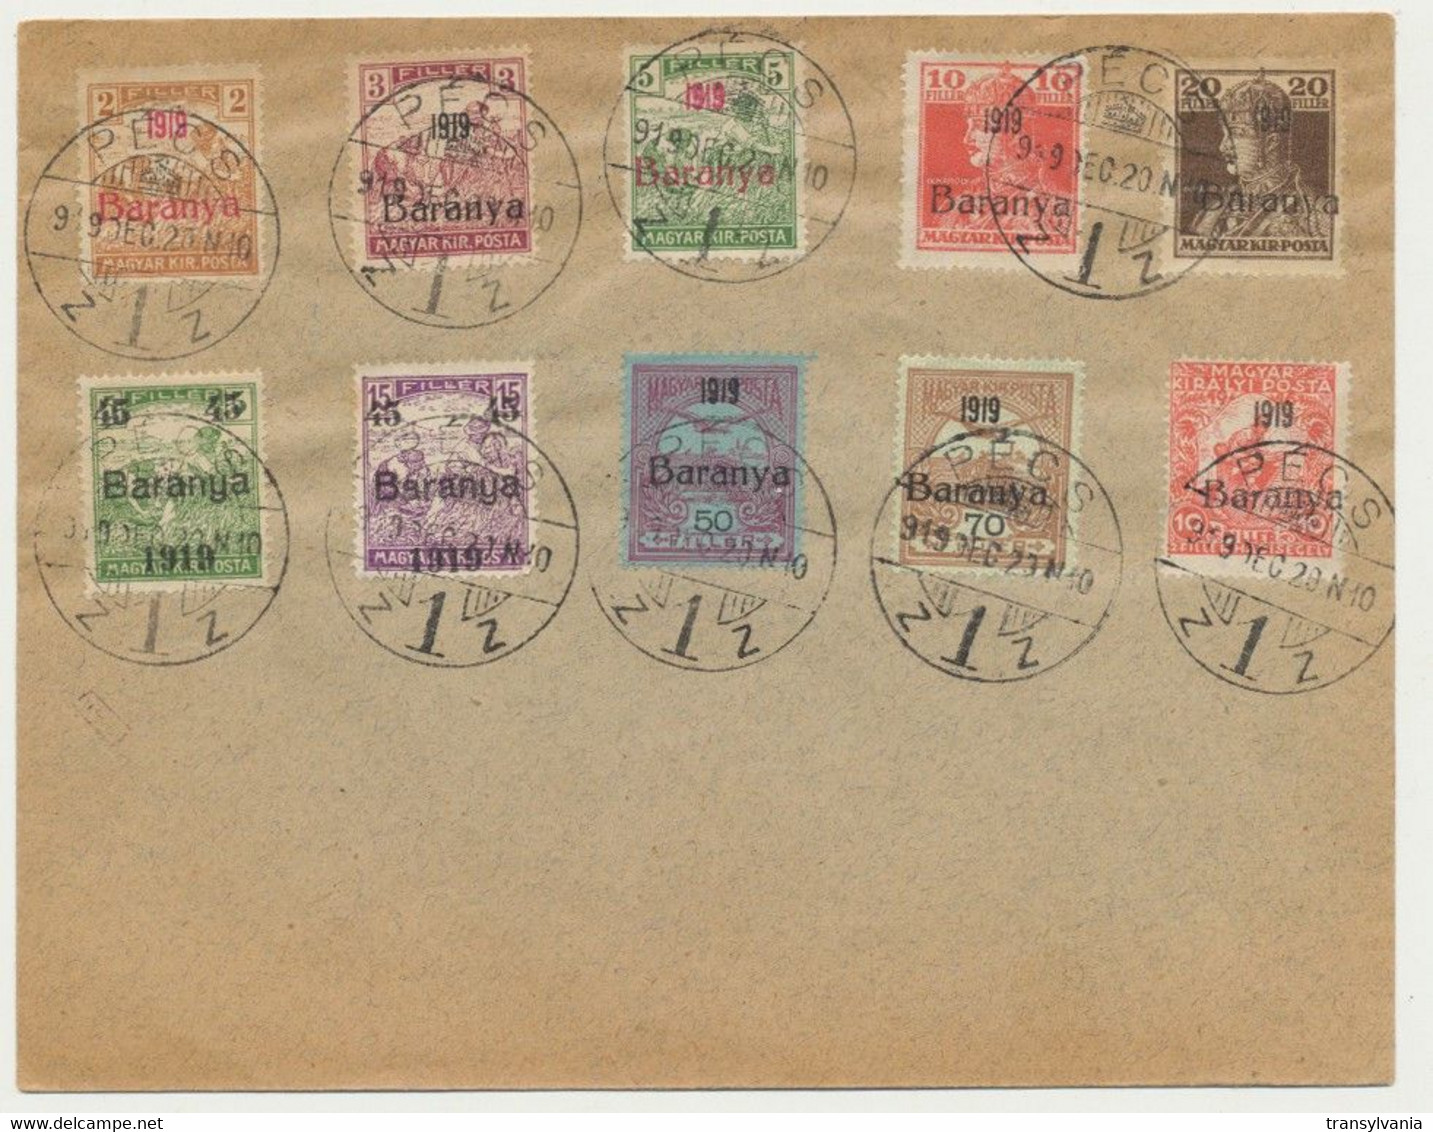 Hungary Serbia Baranya 1919 December - 10 Stamps Cancelled On Cover At Pecs, Turul, Karl, Harvesters, War Relief - Local Post Stamps